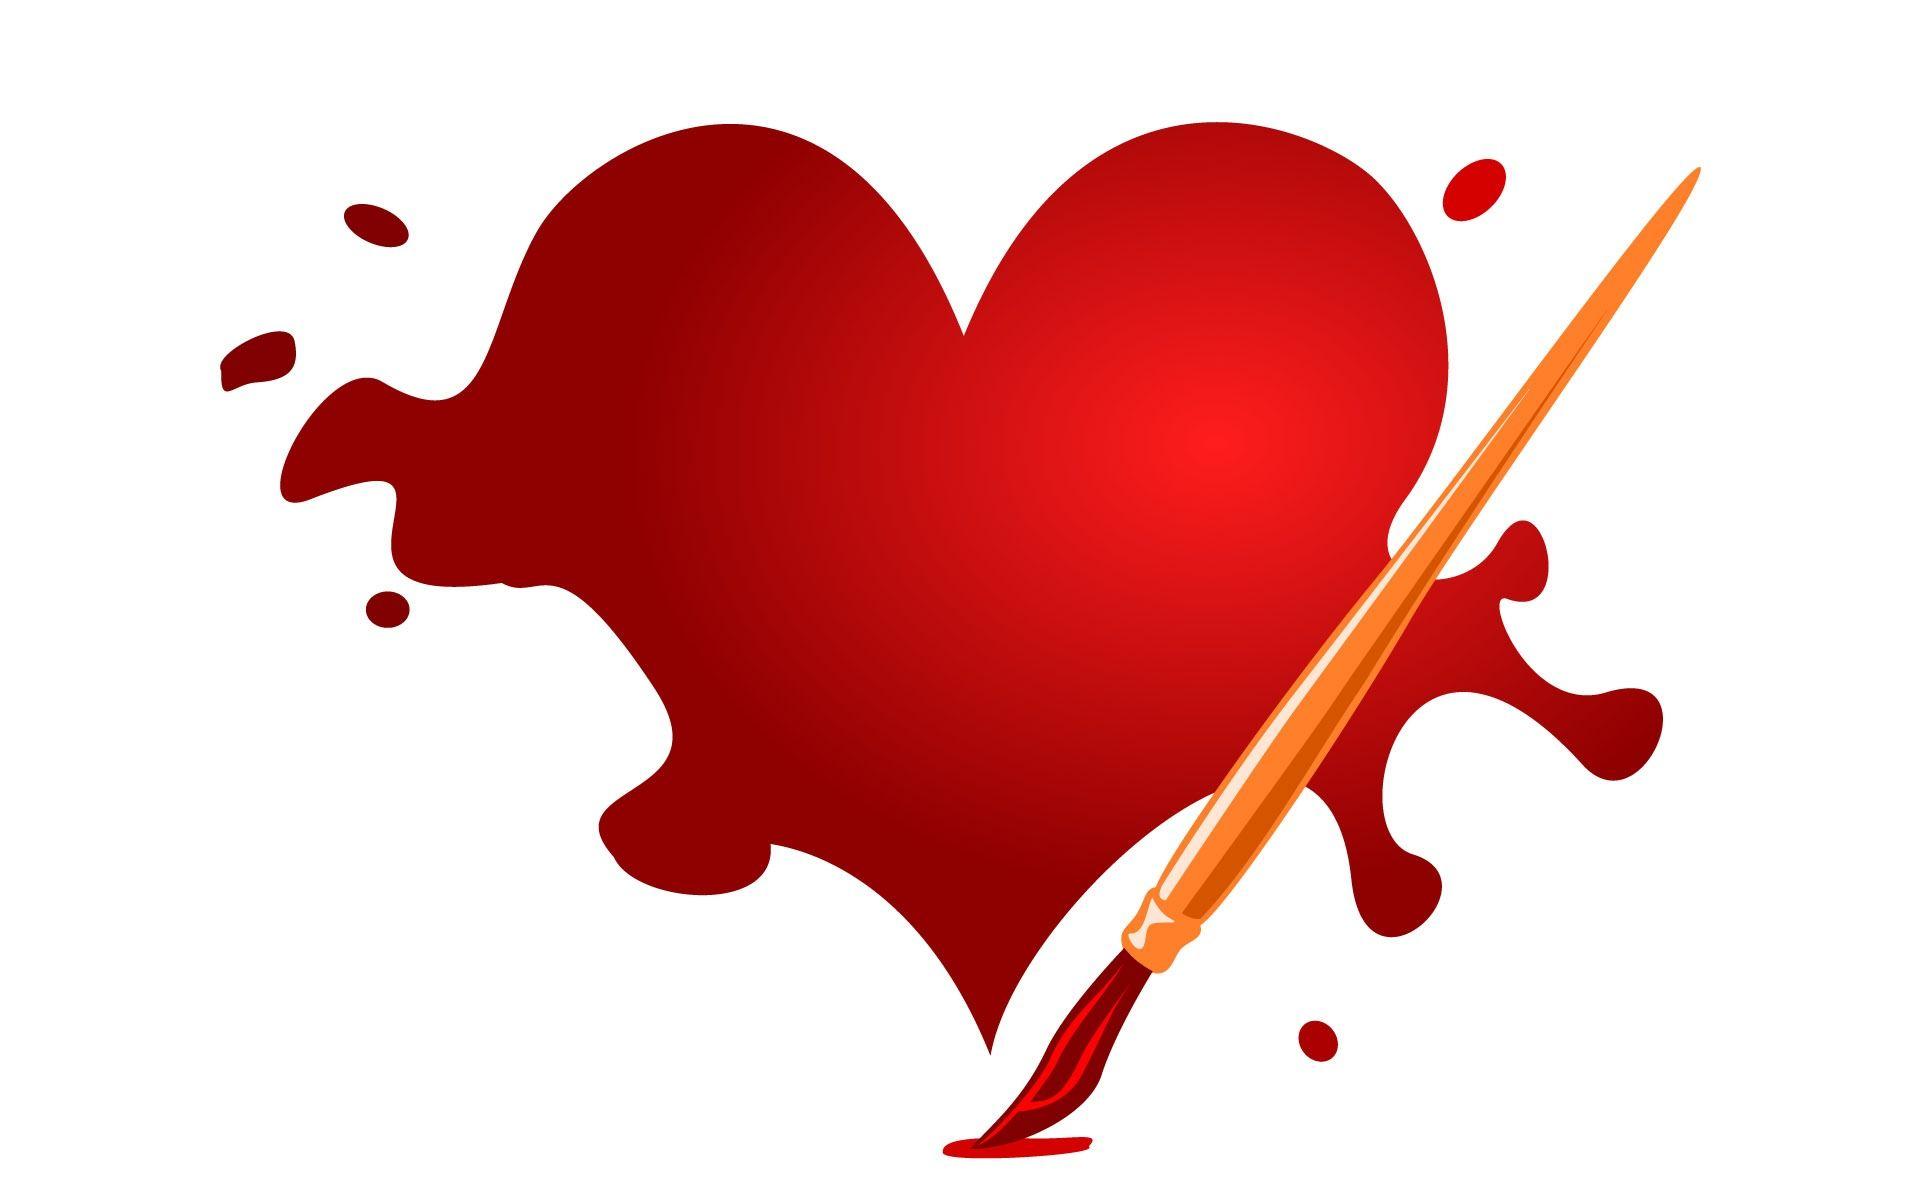 Painting Red Heart with Paintbrush widescreen wallpaper. Wide